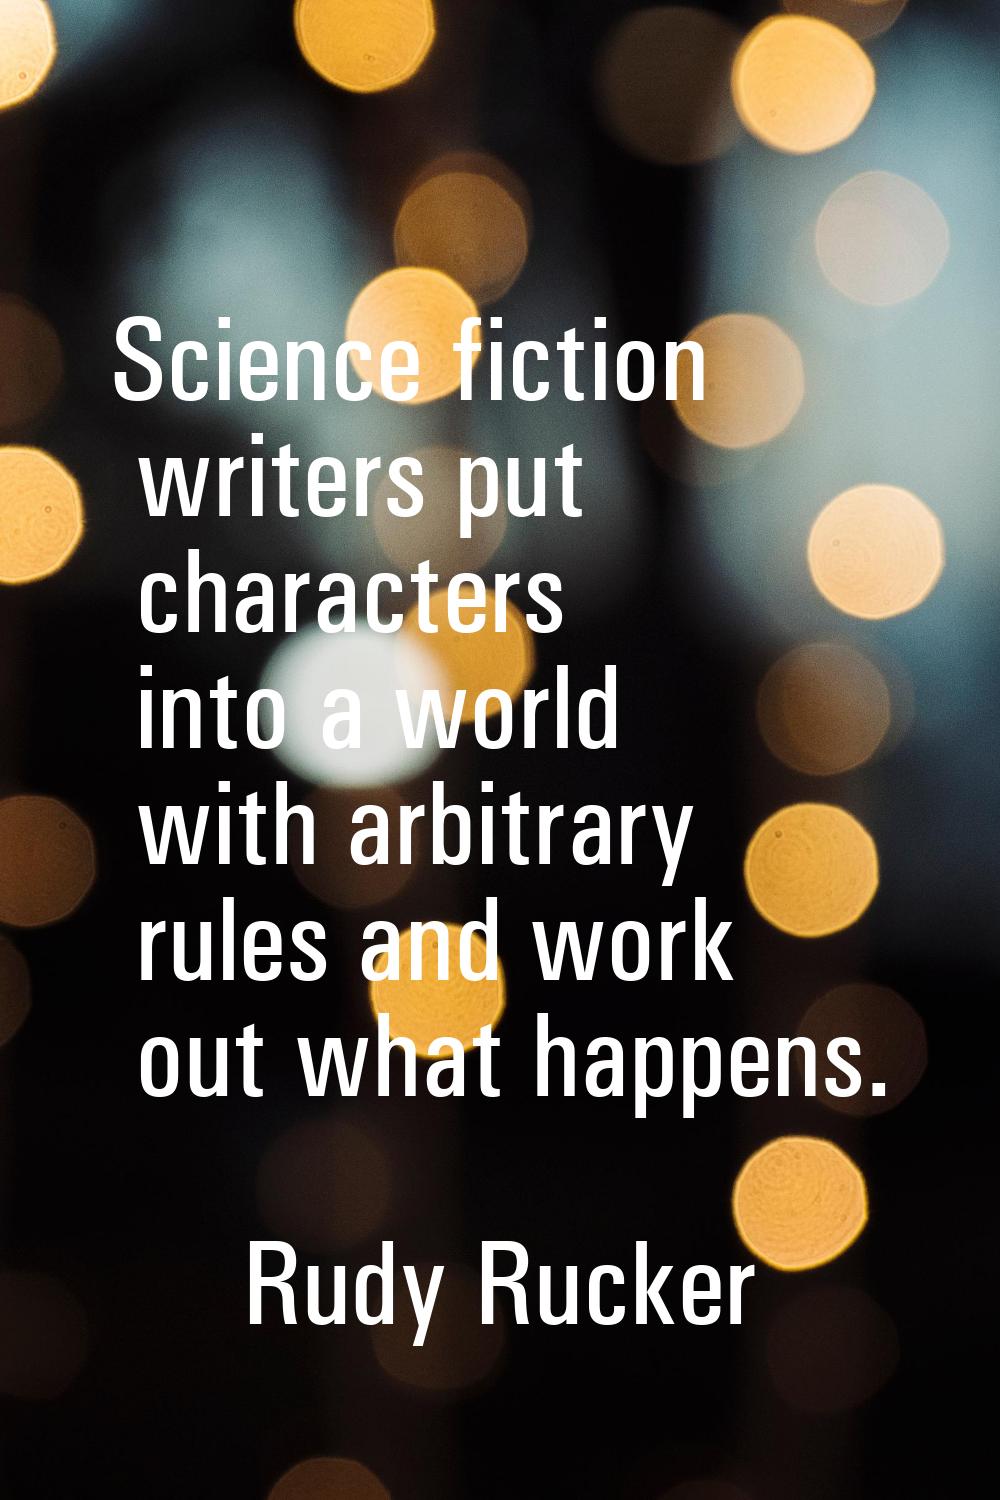 Science fiction writers put characters into a world with arbitrary rules and work out what happens.